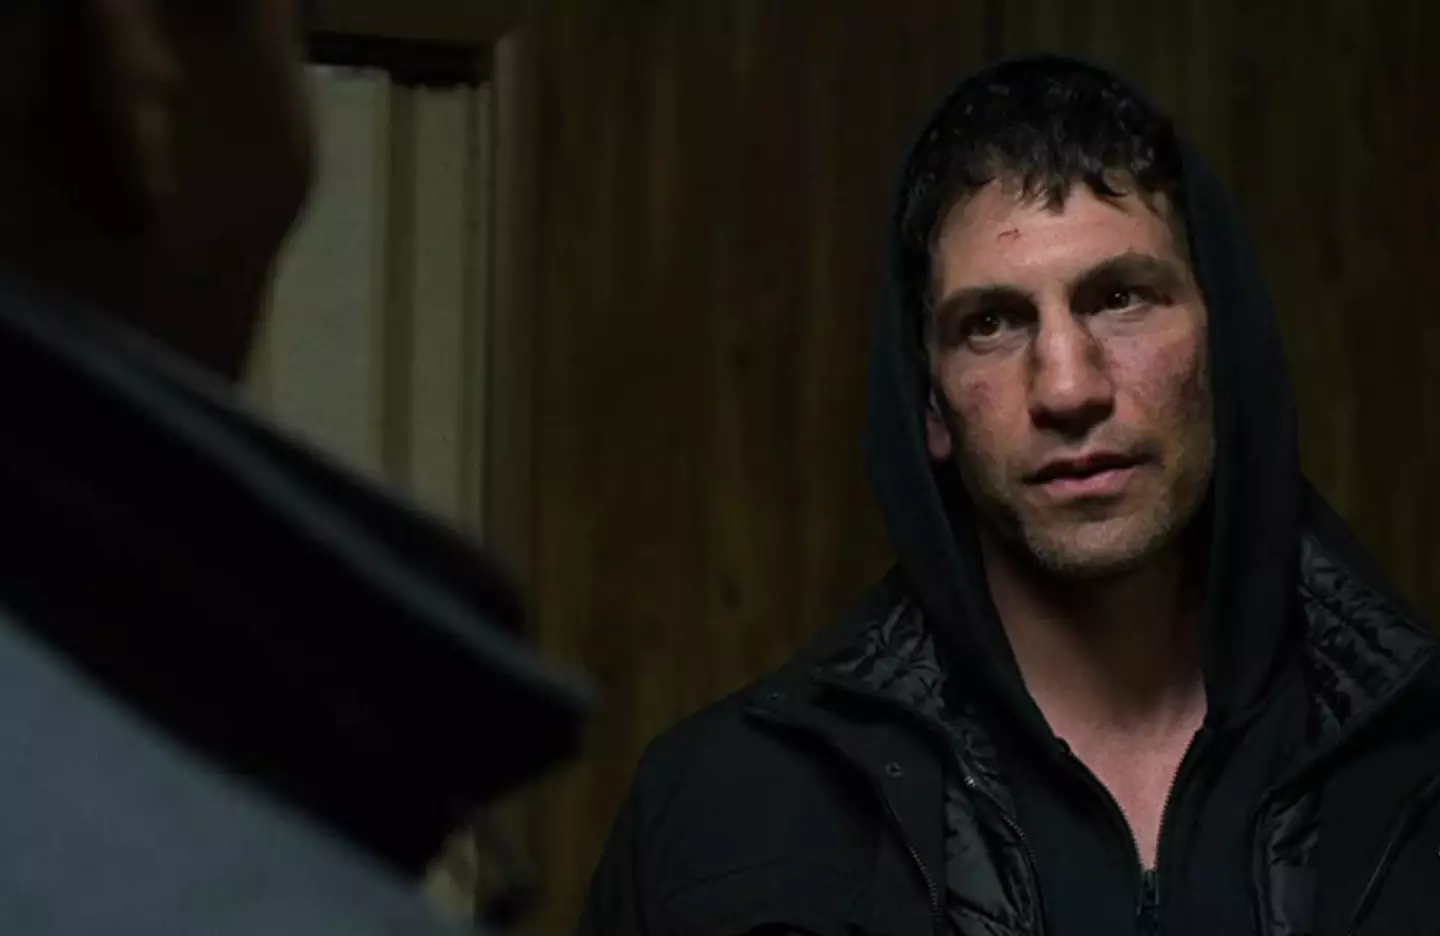 Bernthal admitted to isolating himself from people in his preparation for the role of the Punisher.